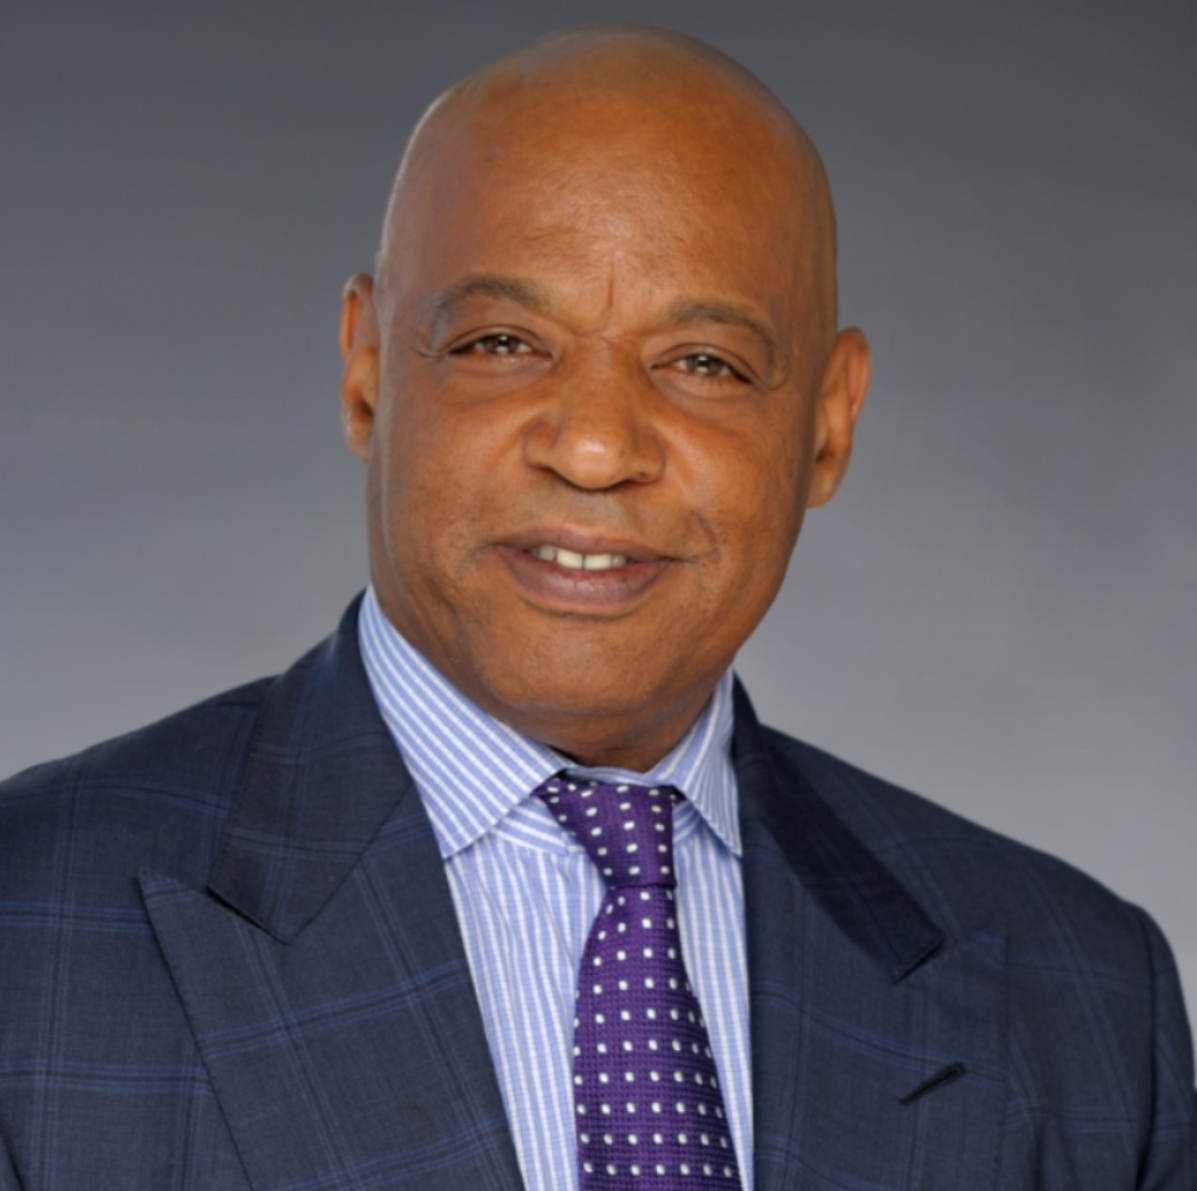 'We are Unapologetically Black': CEO of Largest Black-Owned Bank Talks ...